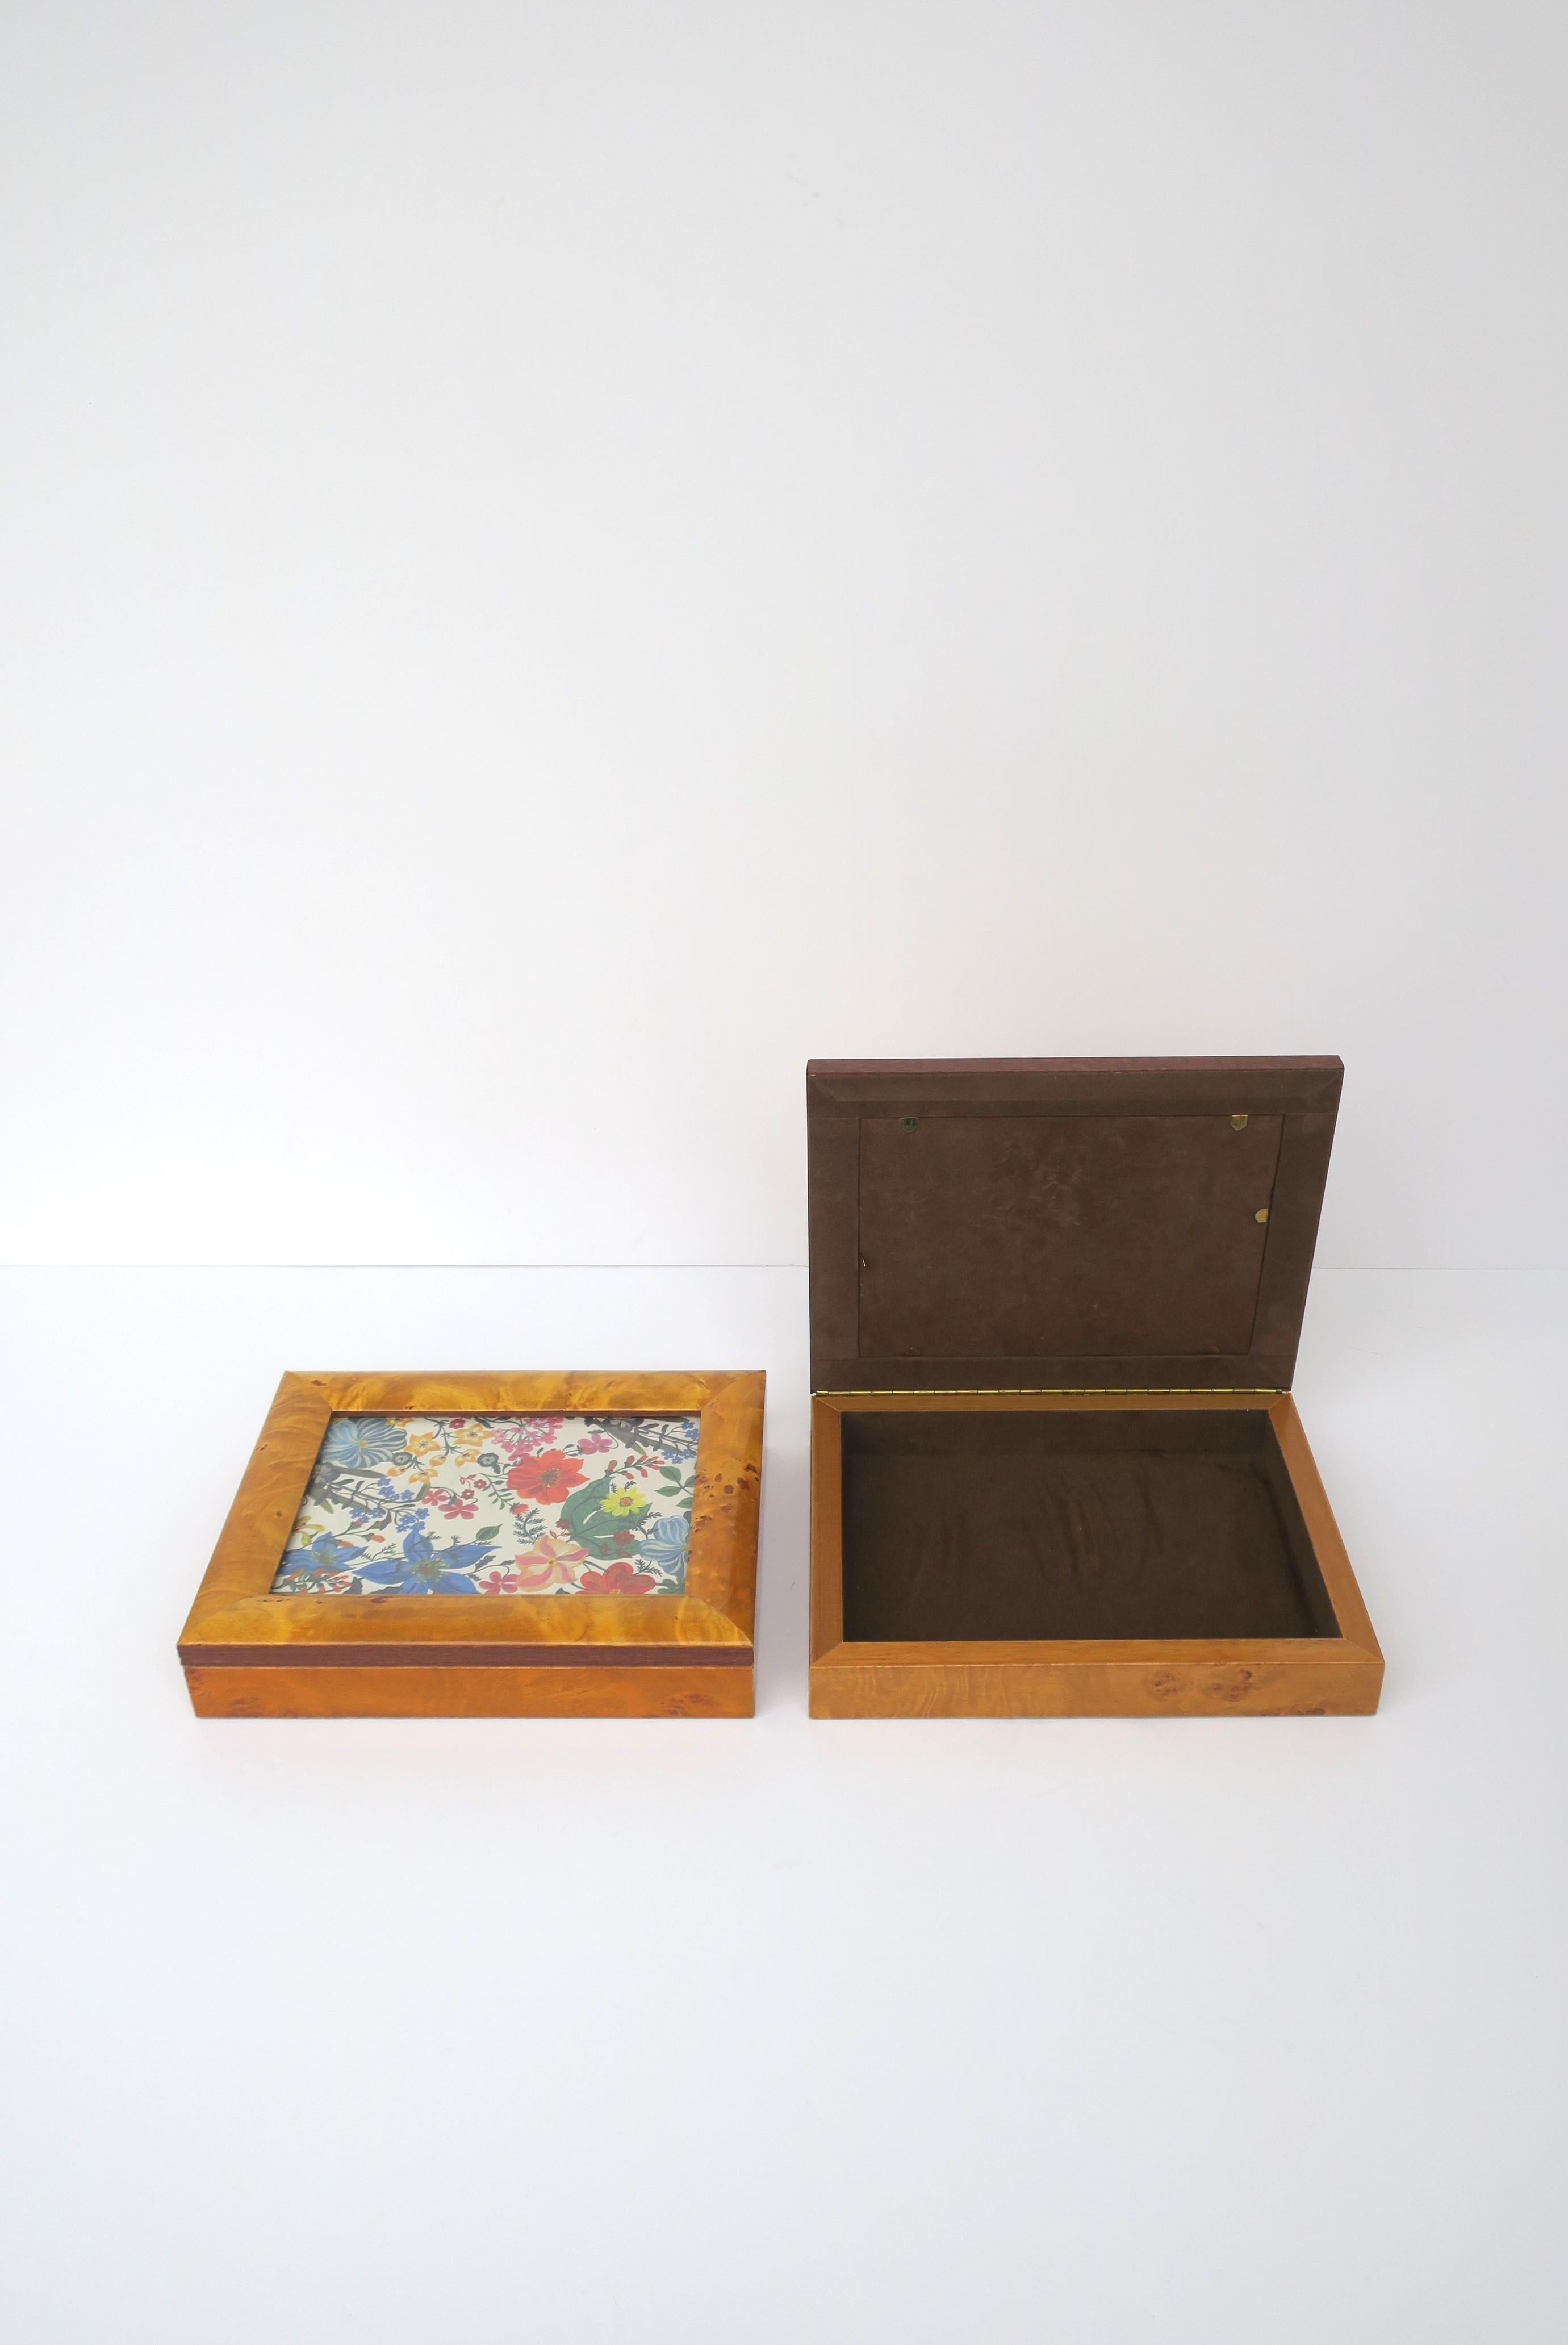 Burl Wood Jewelry Box and Picture Frame For Sale 3